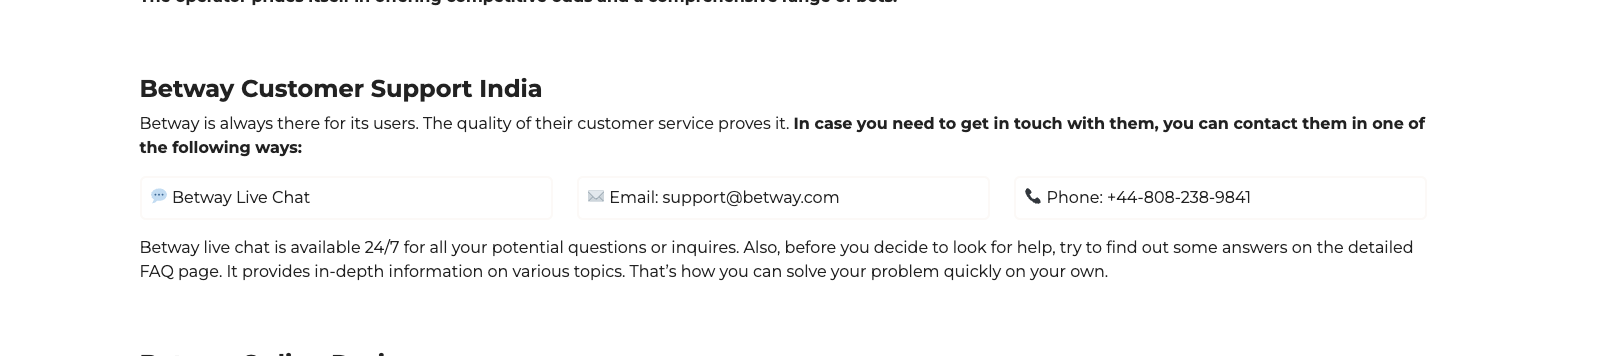 113. Customer Support Section